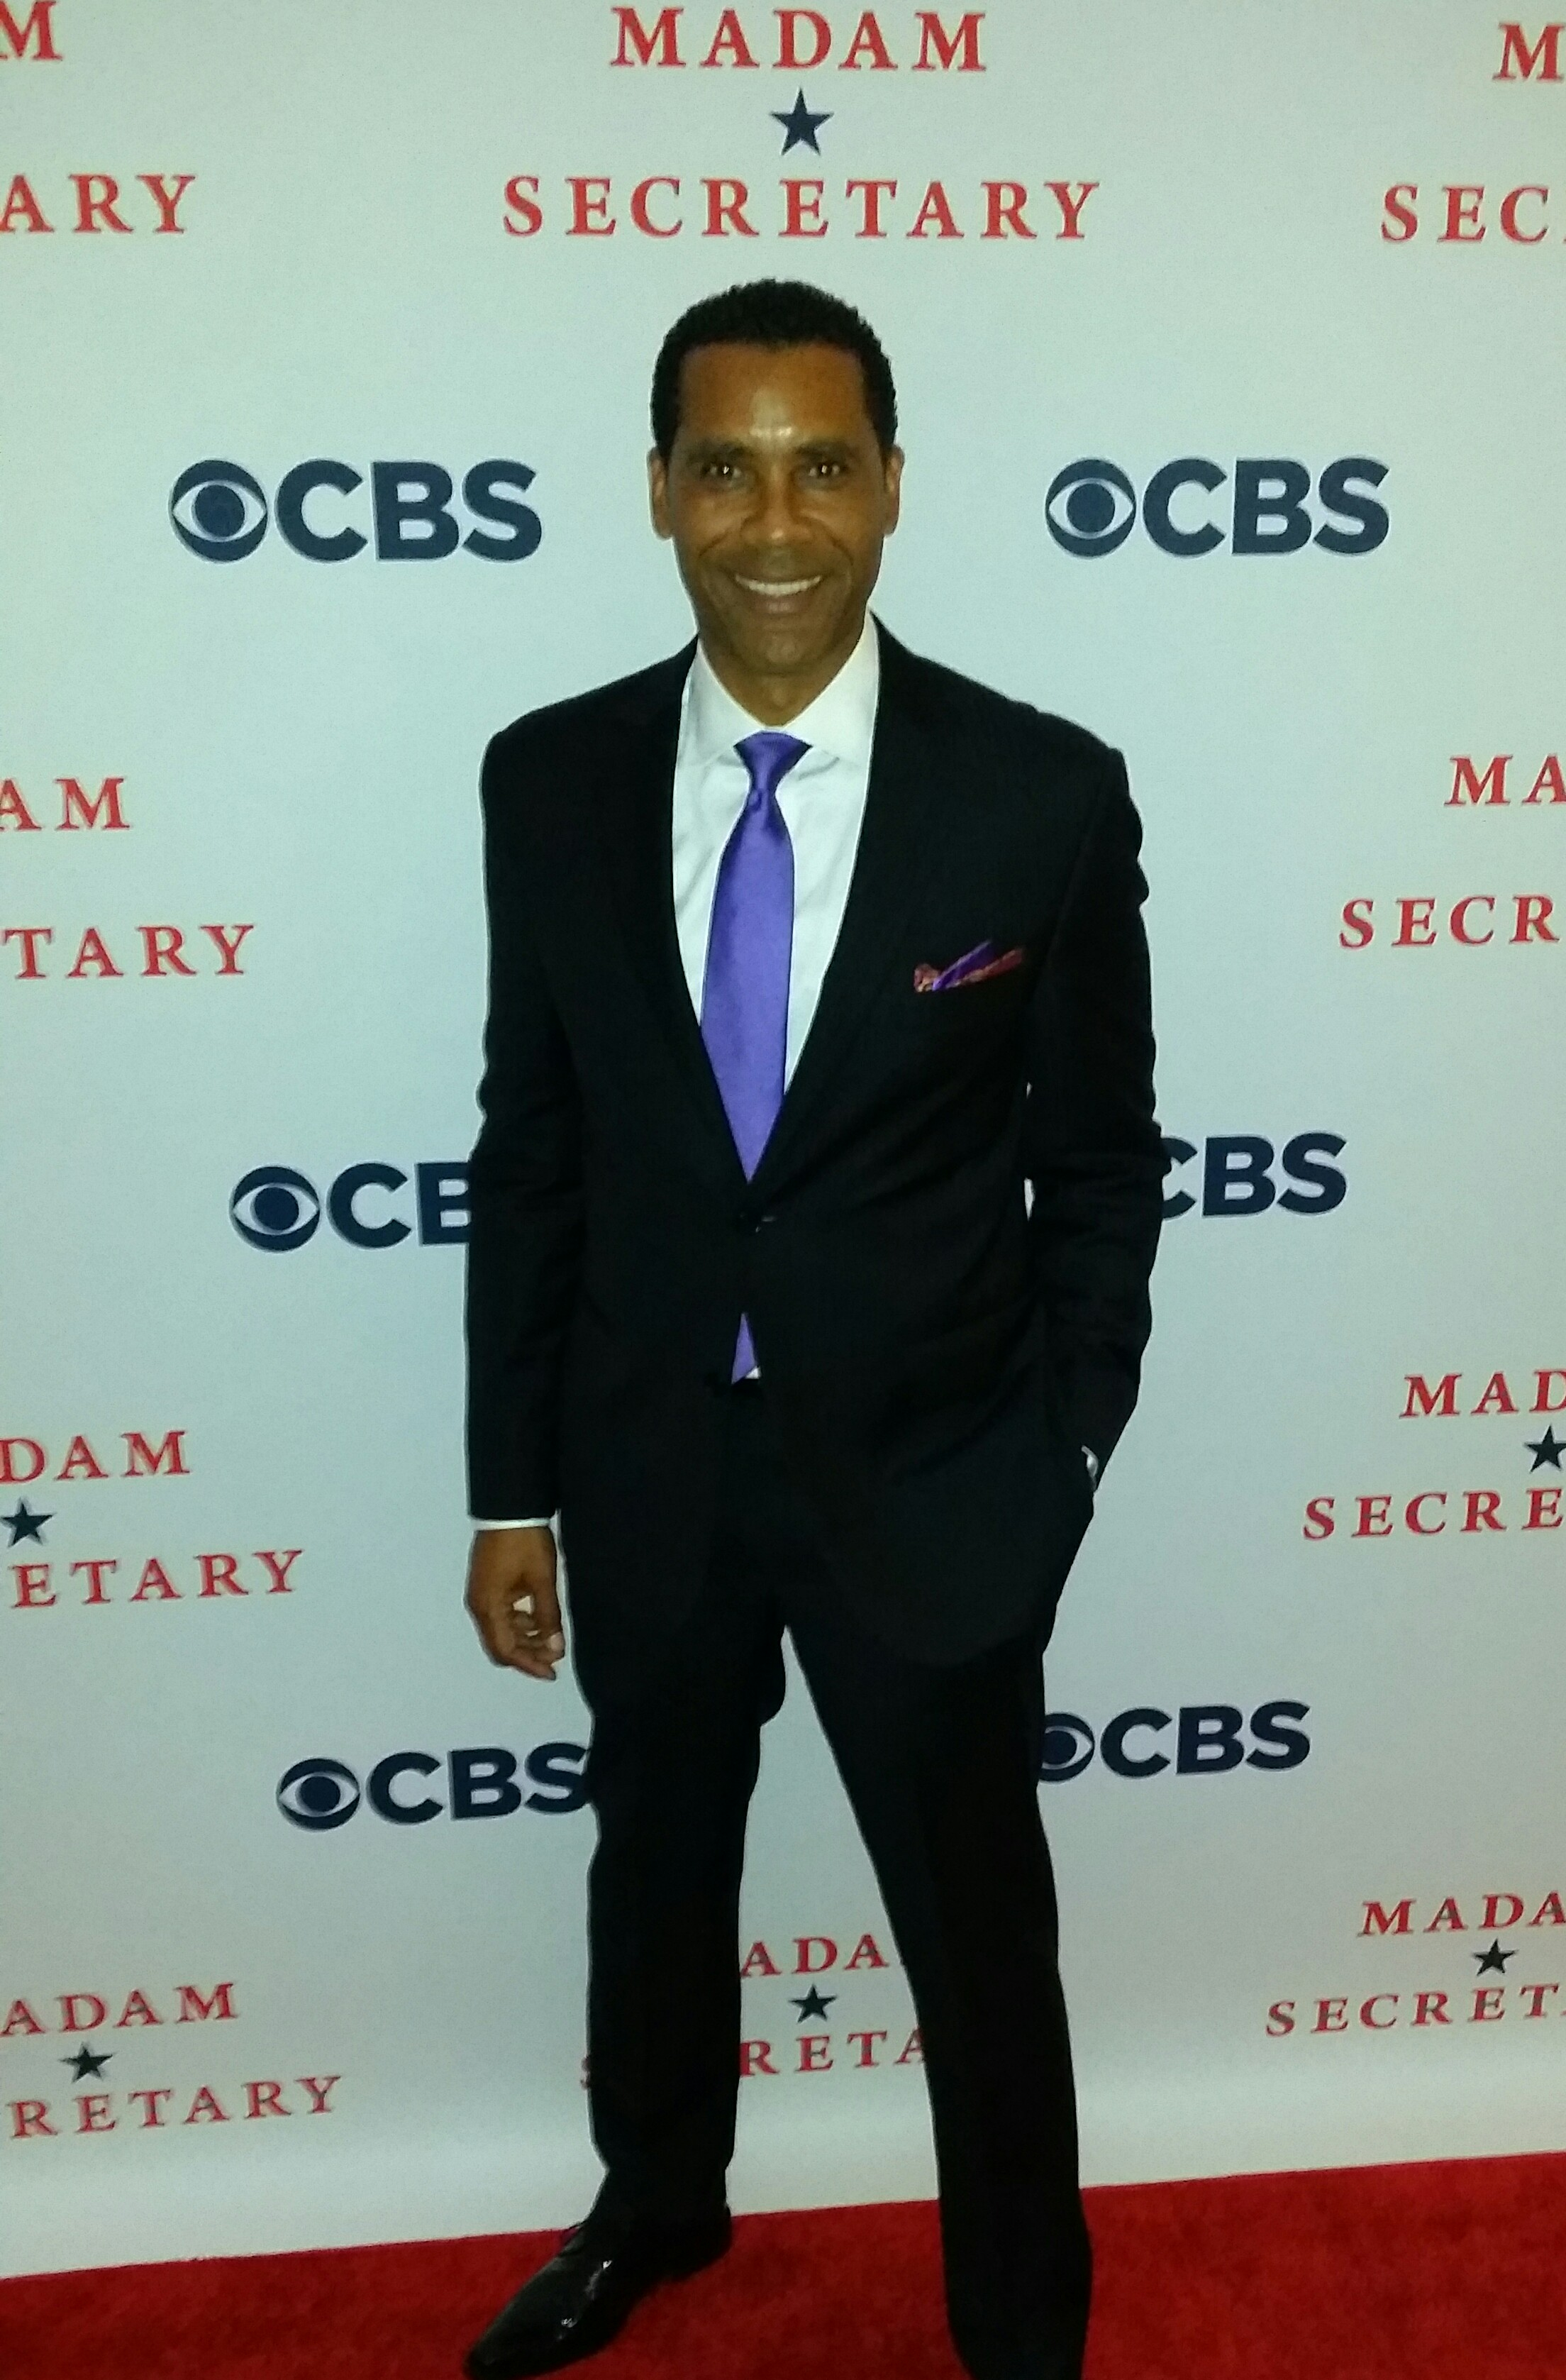 Actor Lamont Easter on the Red Carpet at the CBS Washington DC premiere of Madam Secretary